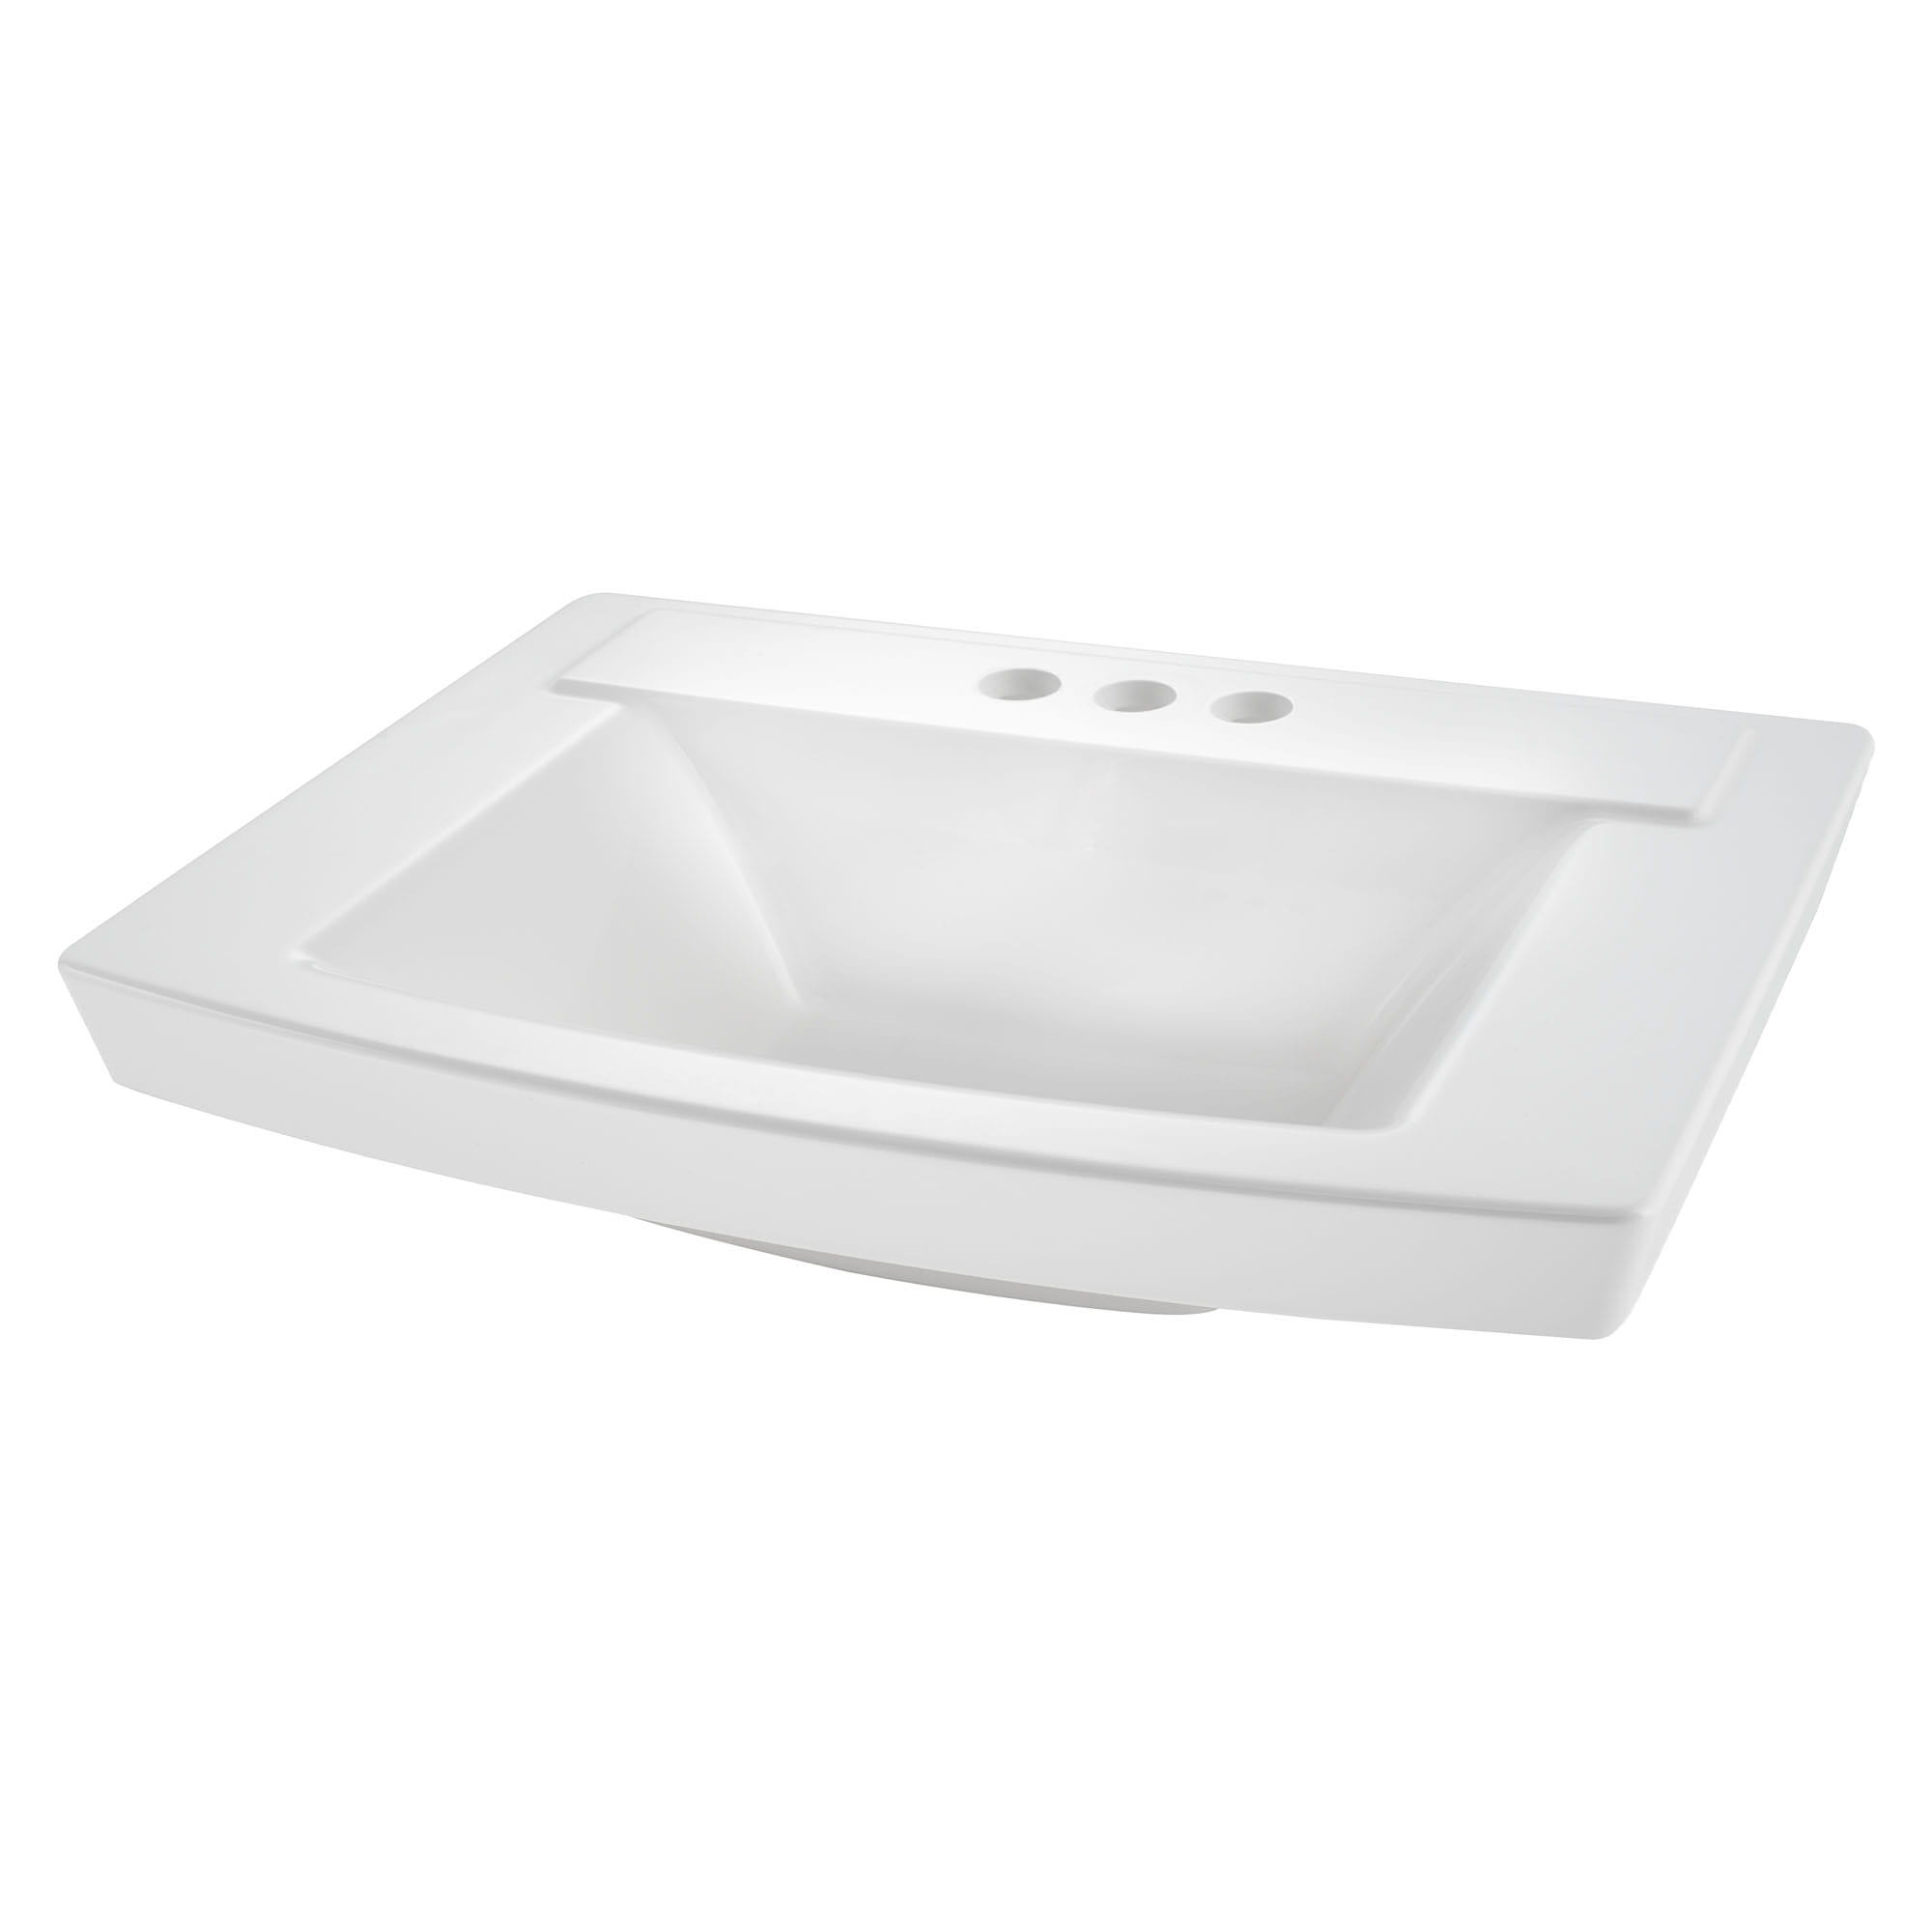 Townsend 24 x 18 Inch Above Counter Sink With 4 Inch Centerset WHITE